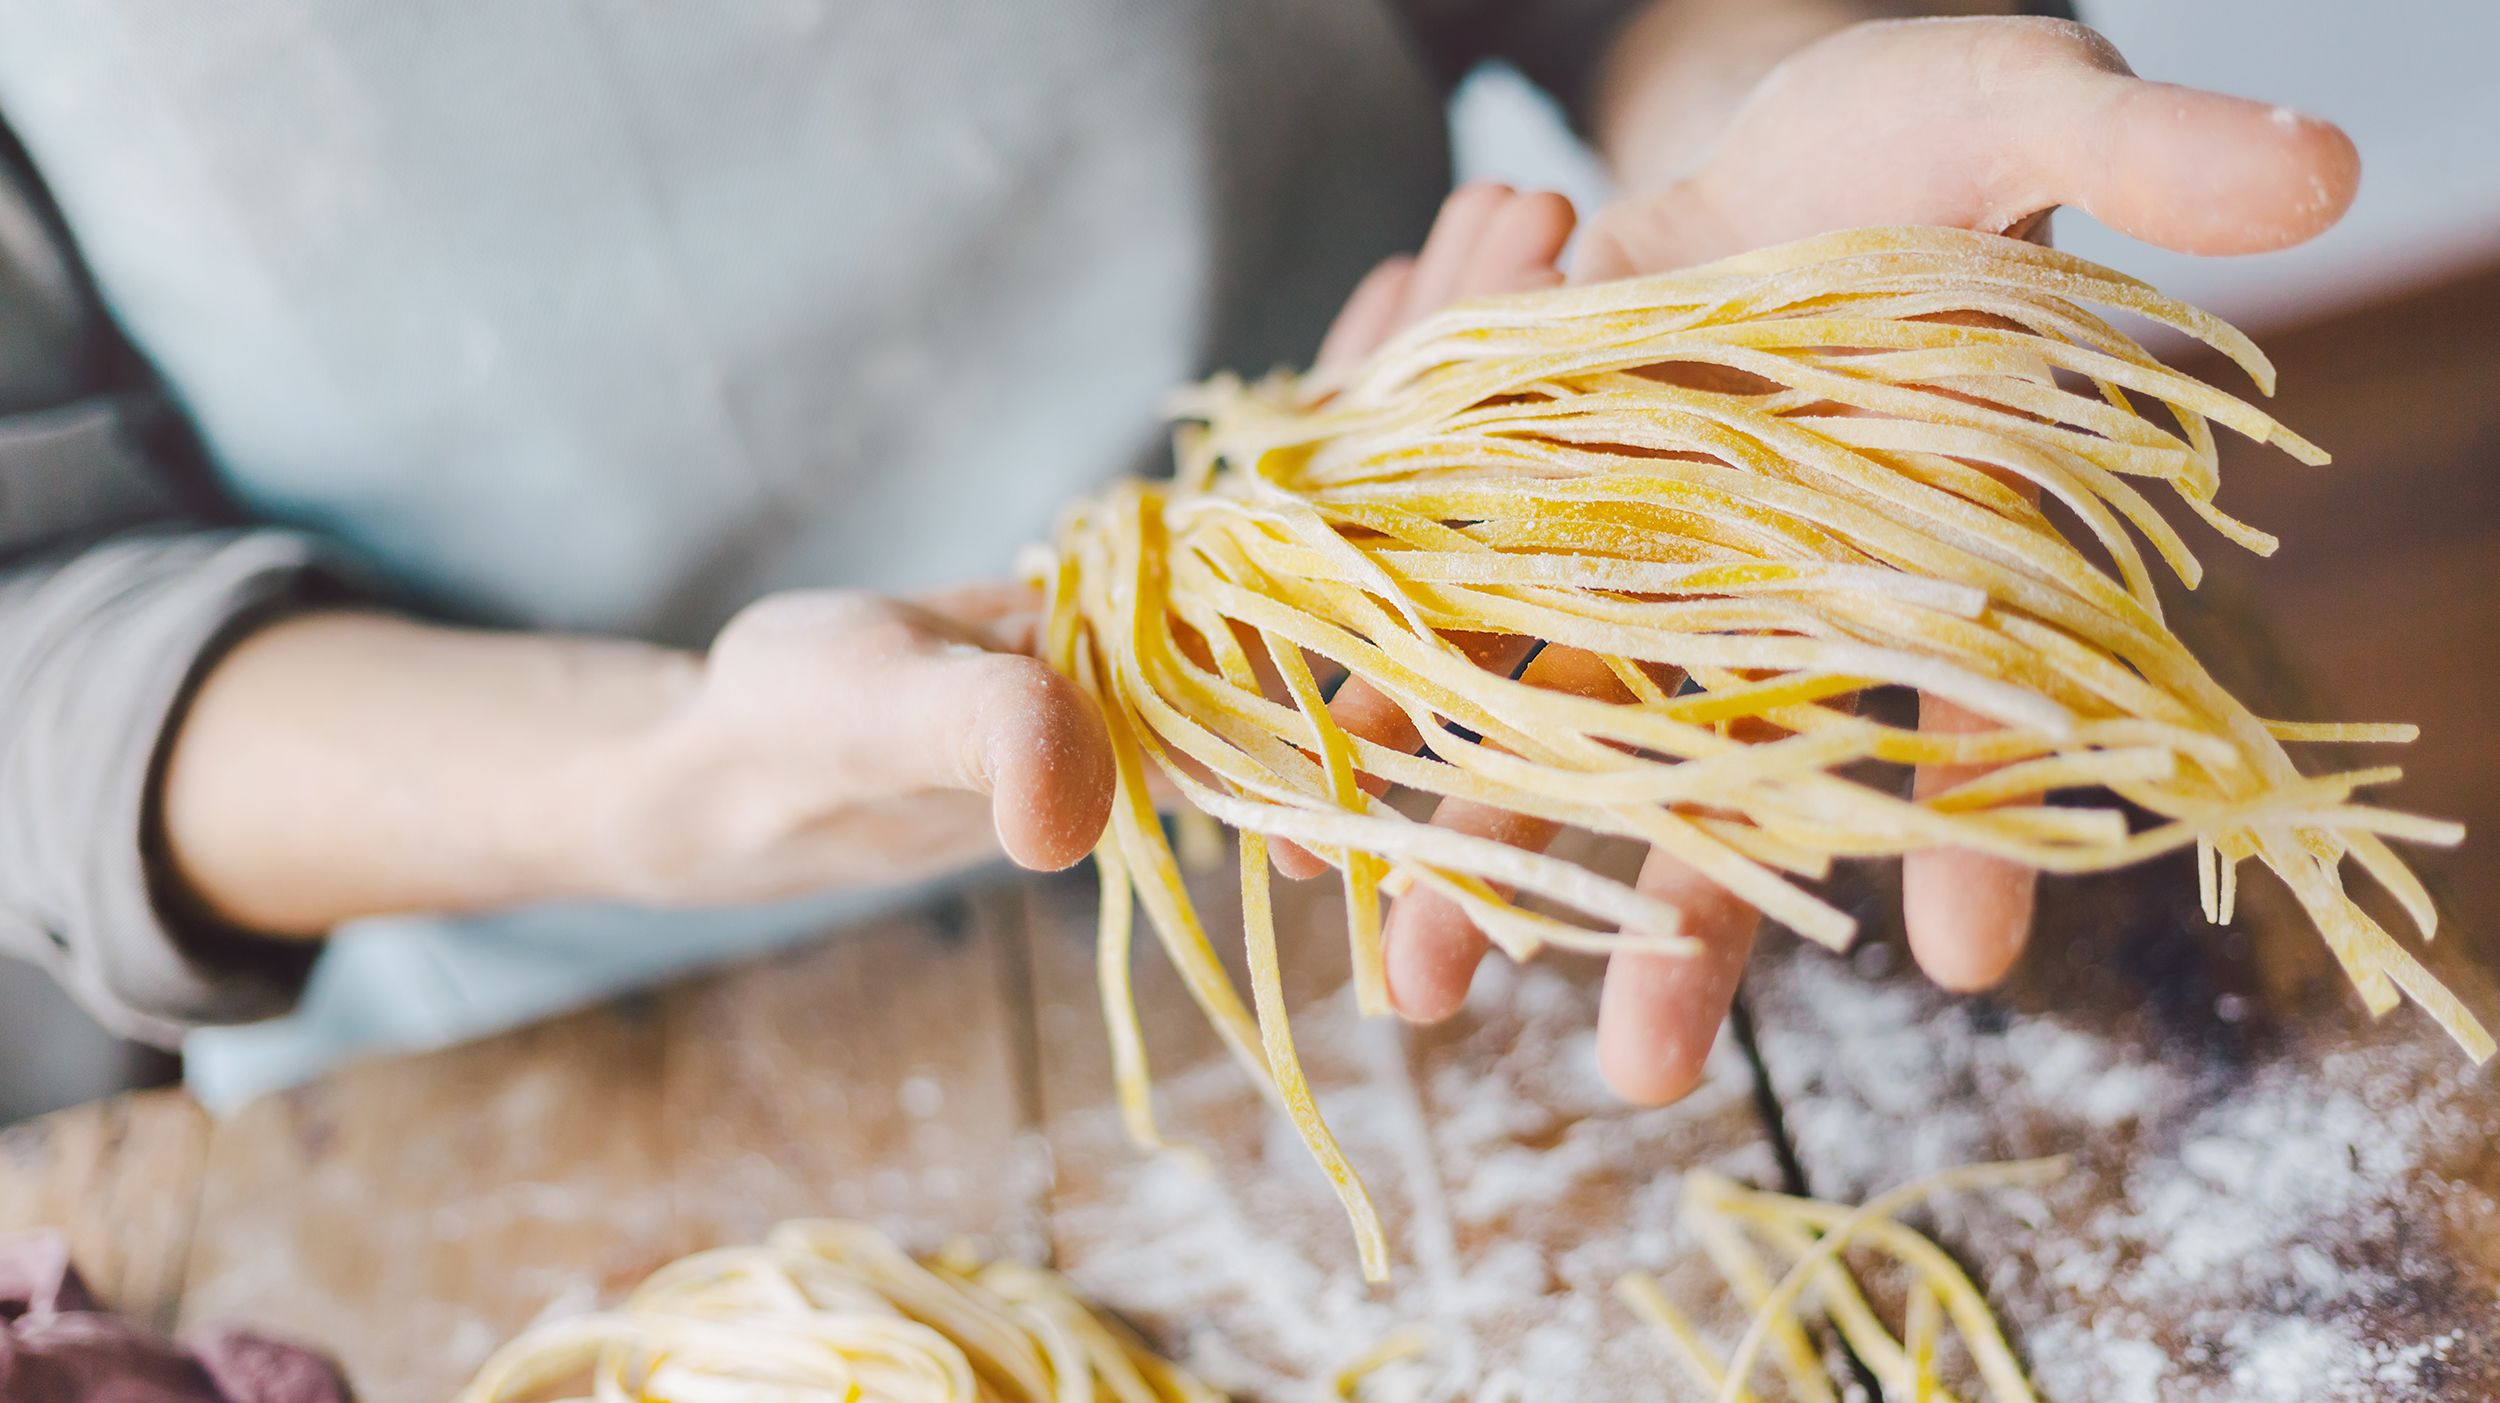 Make fresh pasta the easy way. This attachment tranforms your